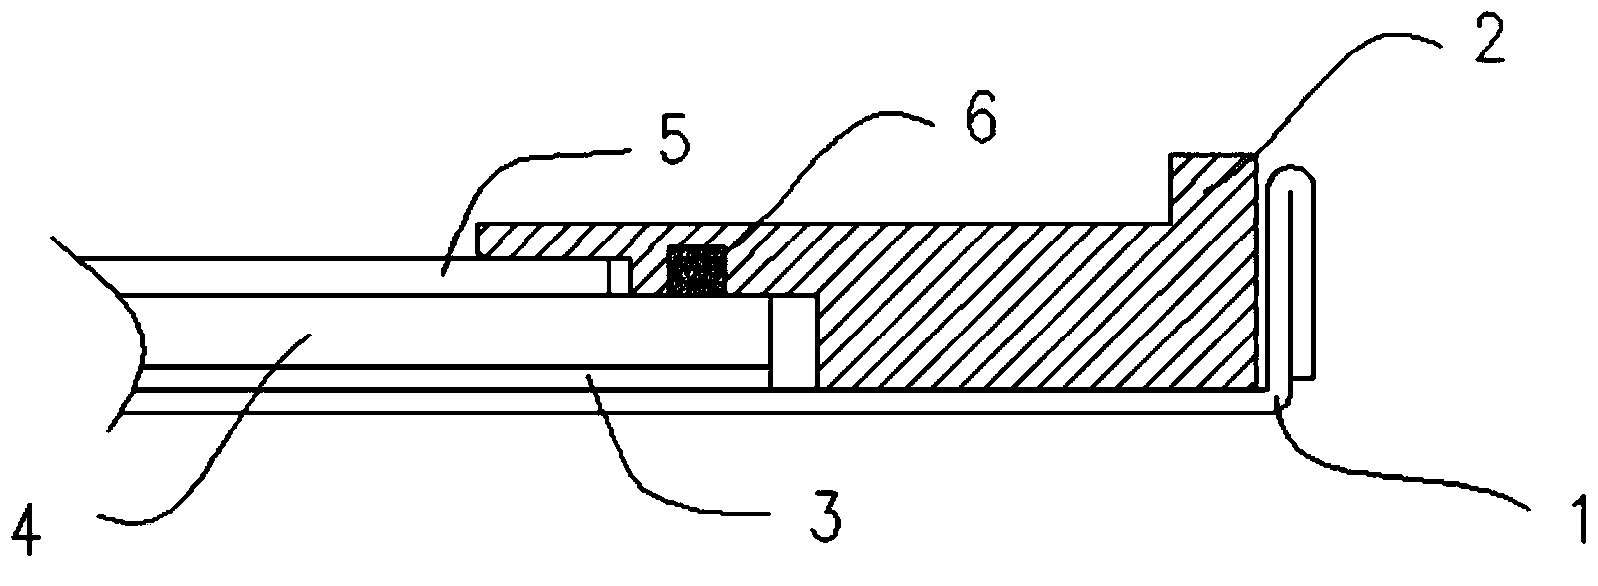 Backlight source and display device